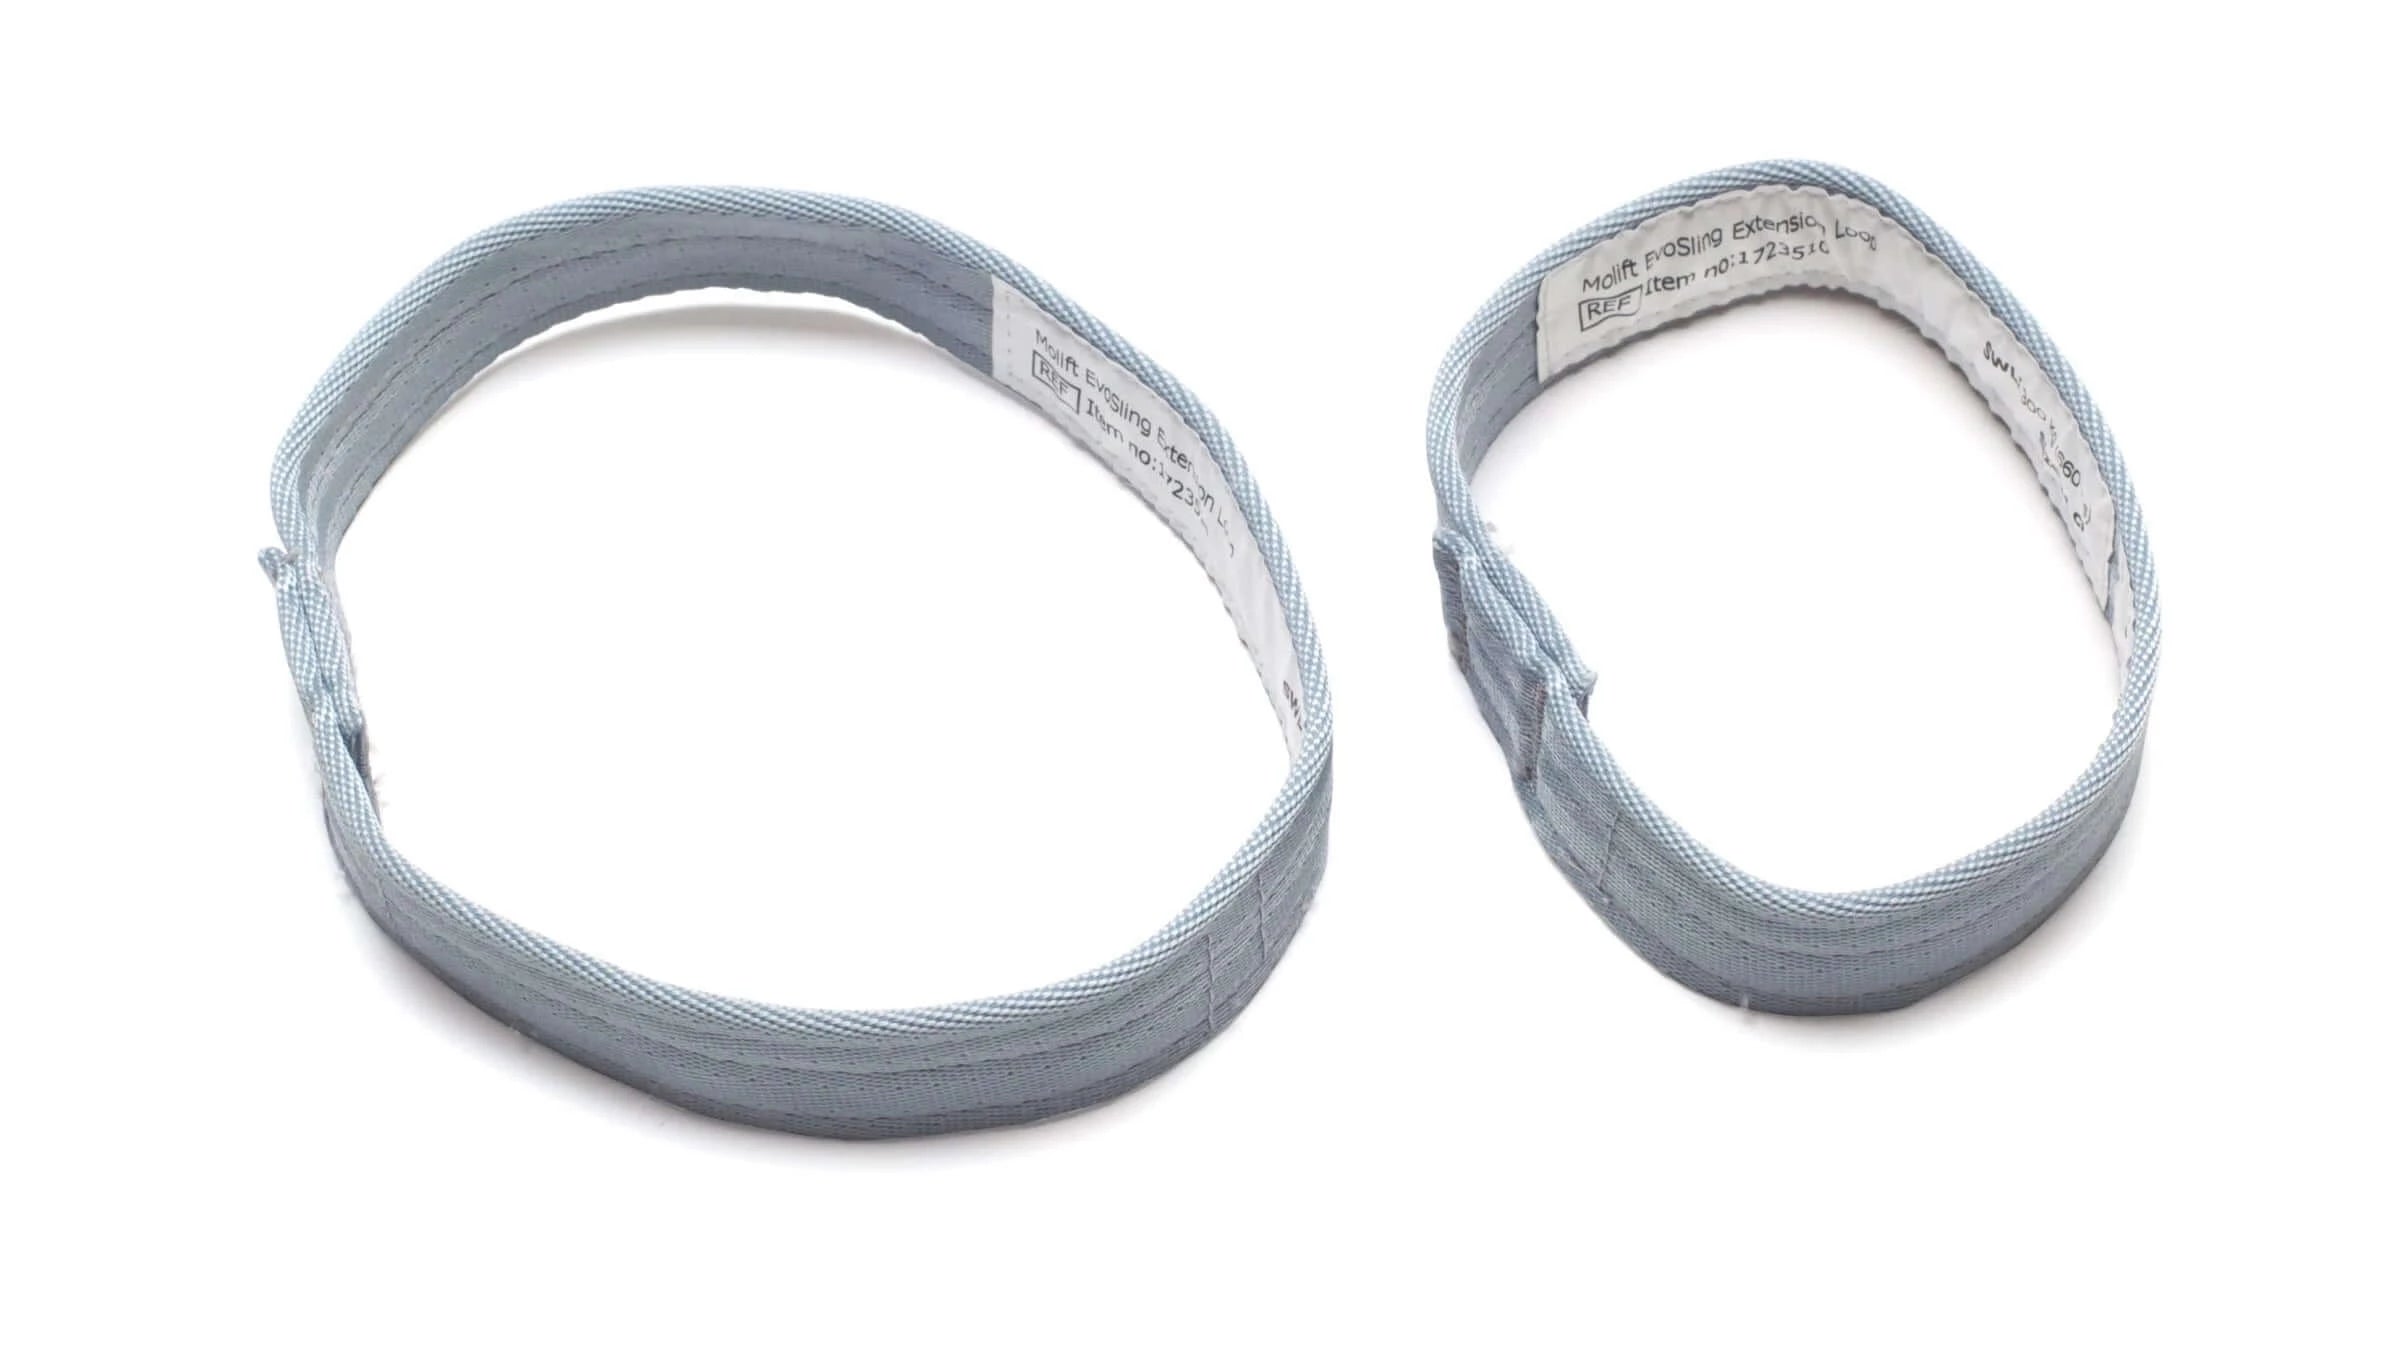 Molift EvoSling Extension loops shown separated from each other with a white background